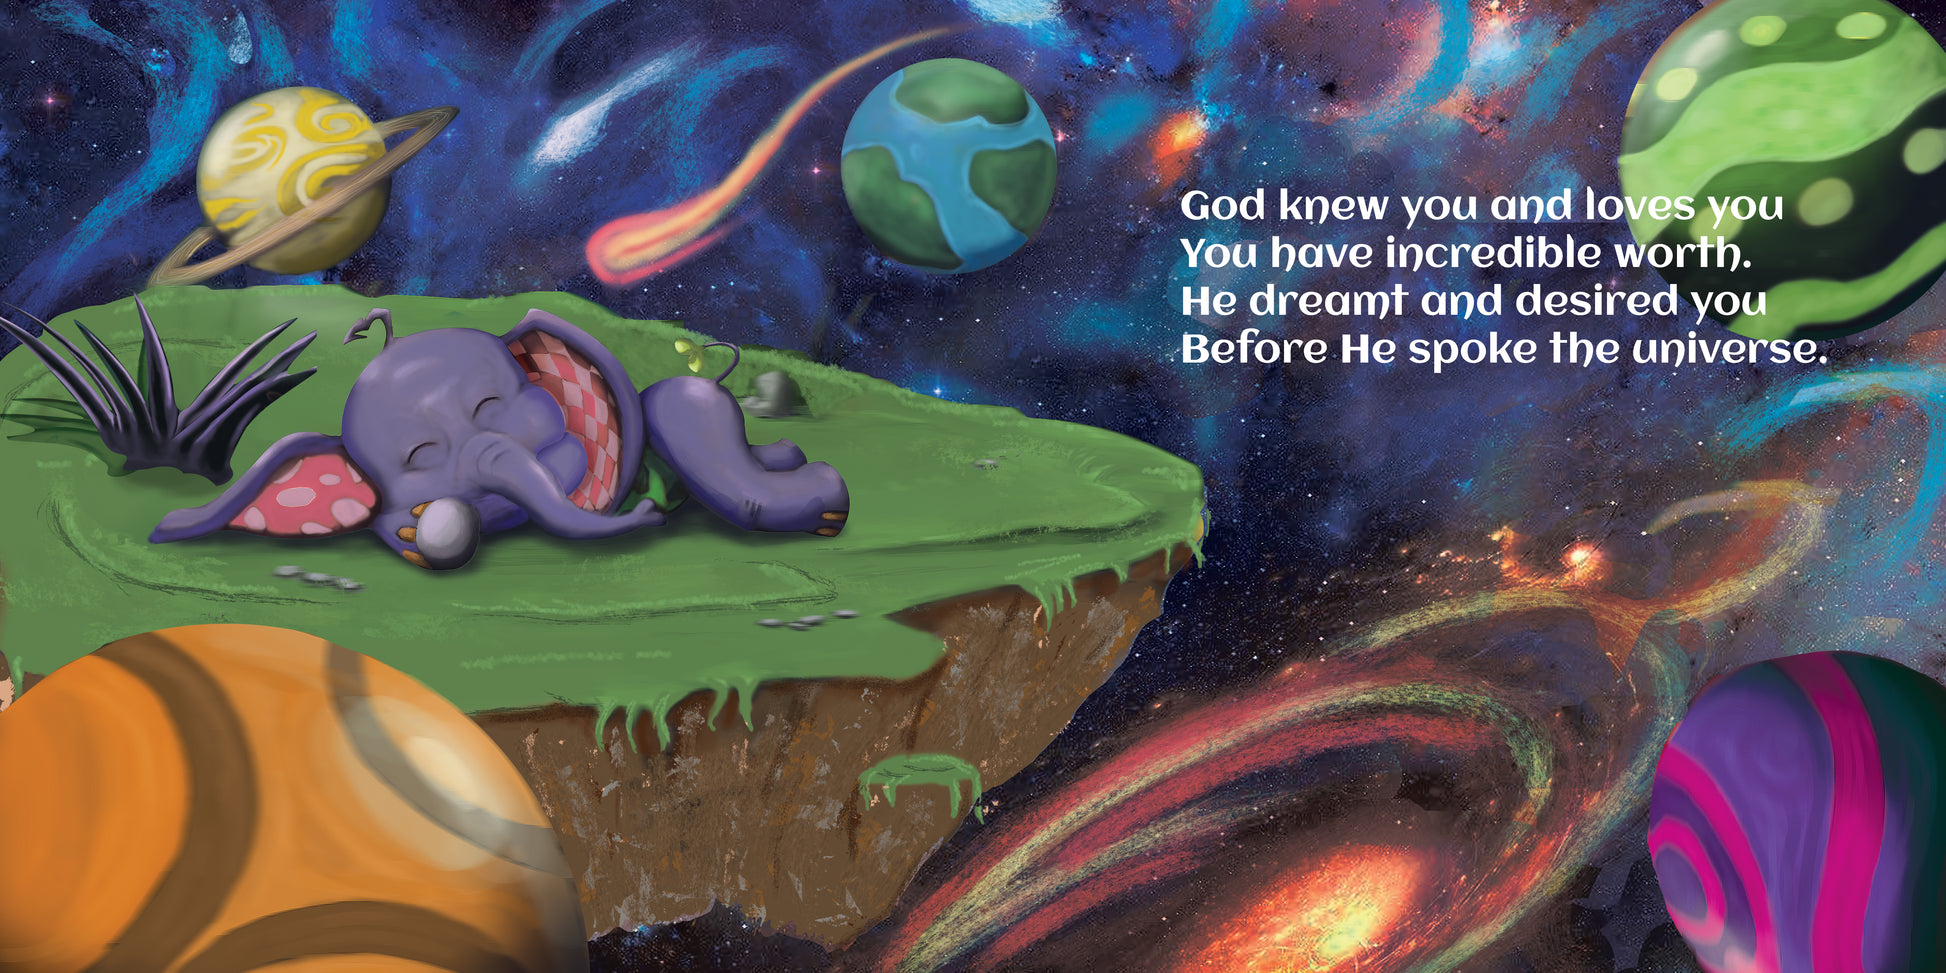 Kaynay sleeps peacefully as she is assured of God's love for her before the universe wa created.